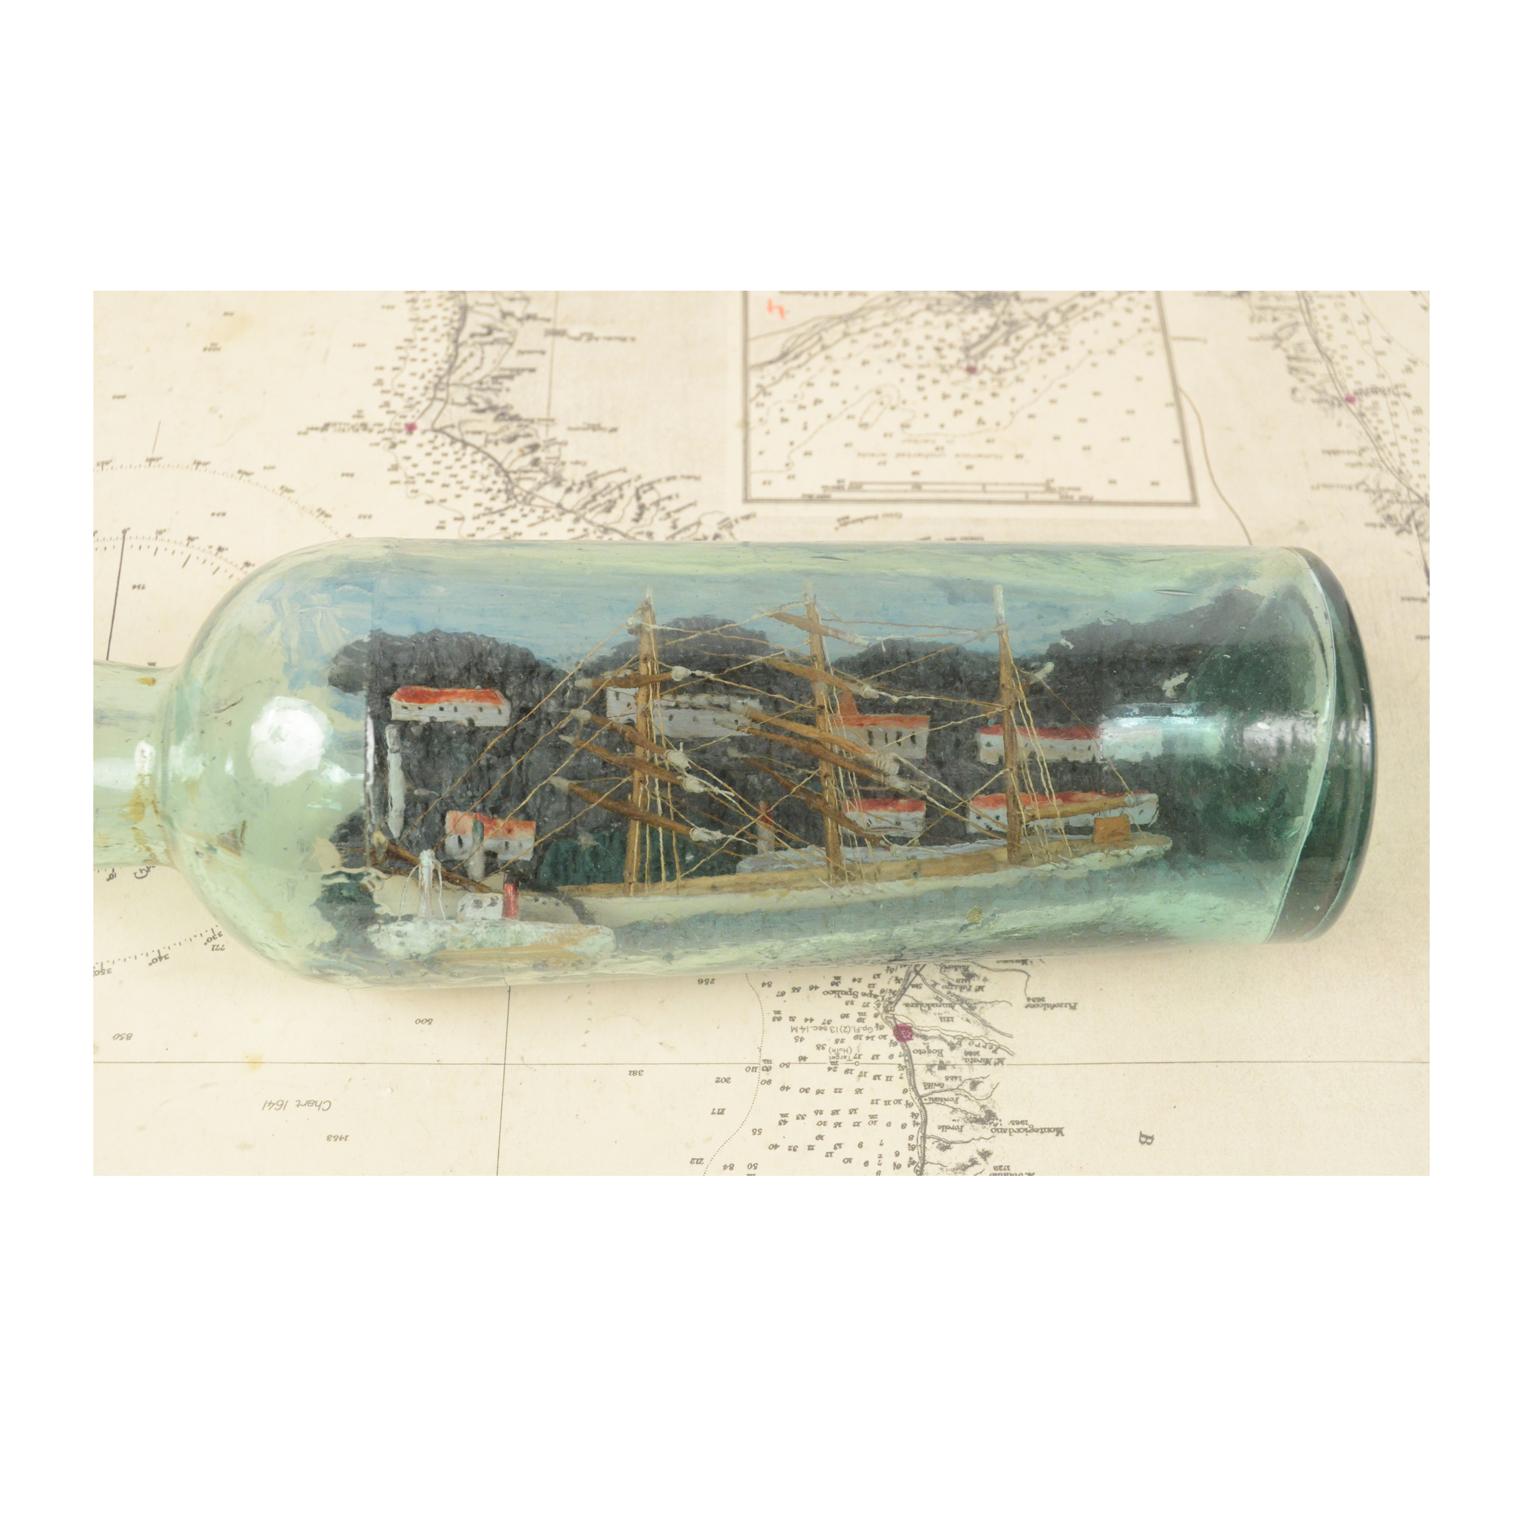 British Diorama in a Bottle, Depicting a 3-Masted Ship, 1920s